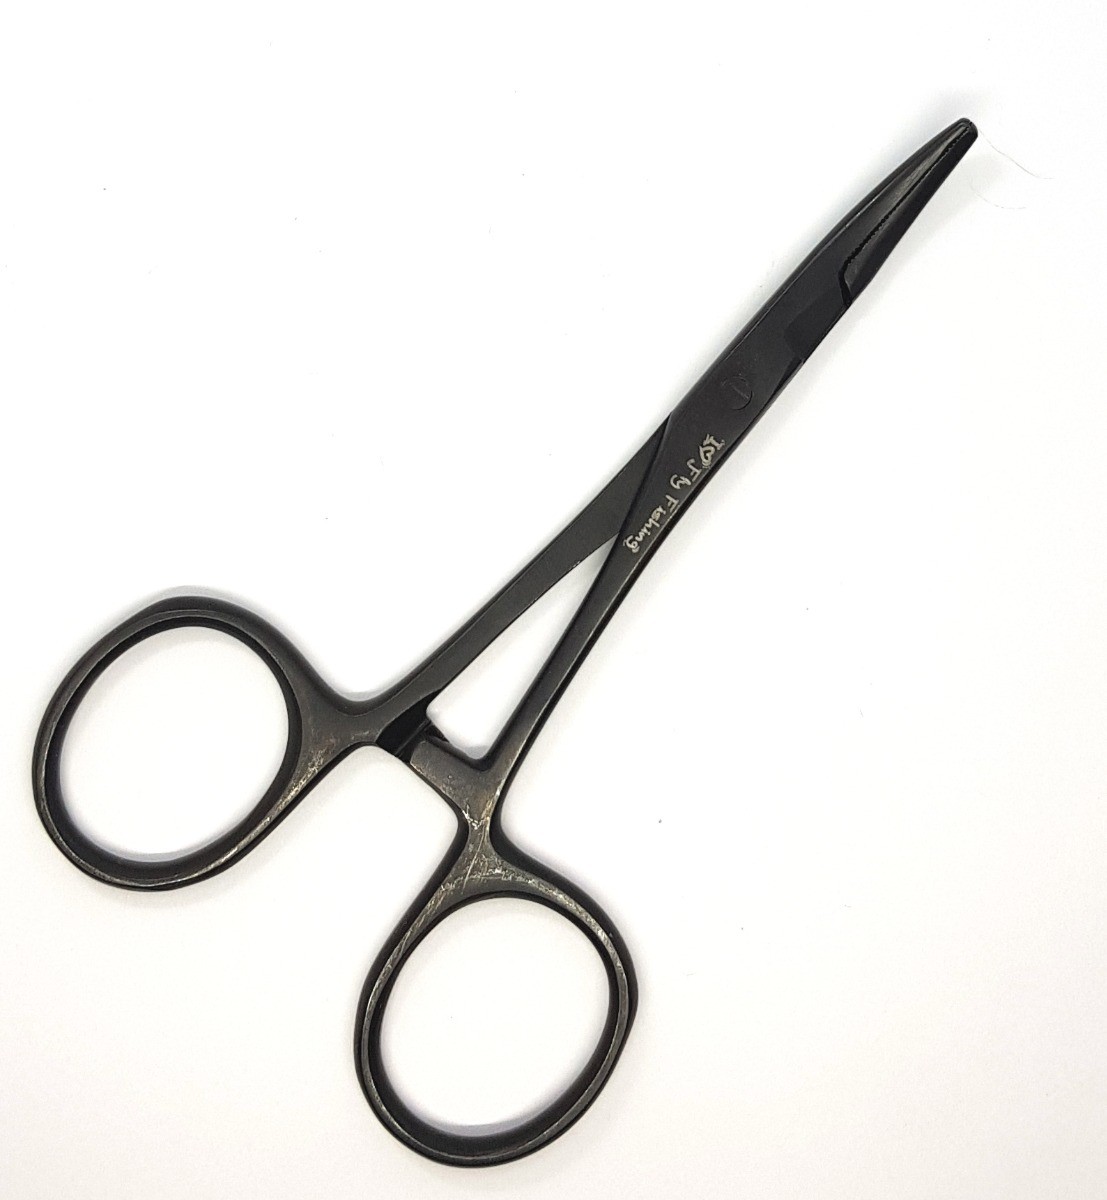 Black Pro Forceps 5 Curved Tip with Scissor Function - I Love Fly